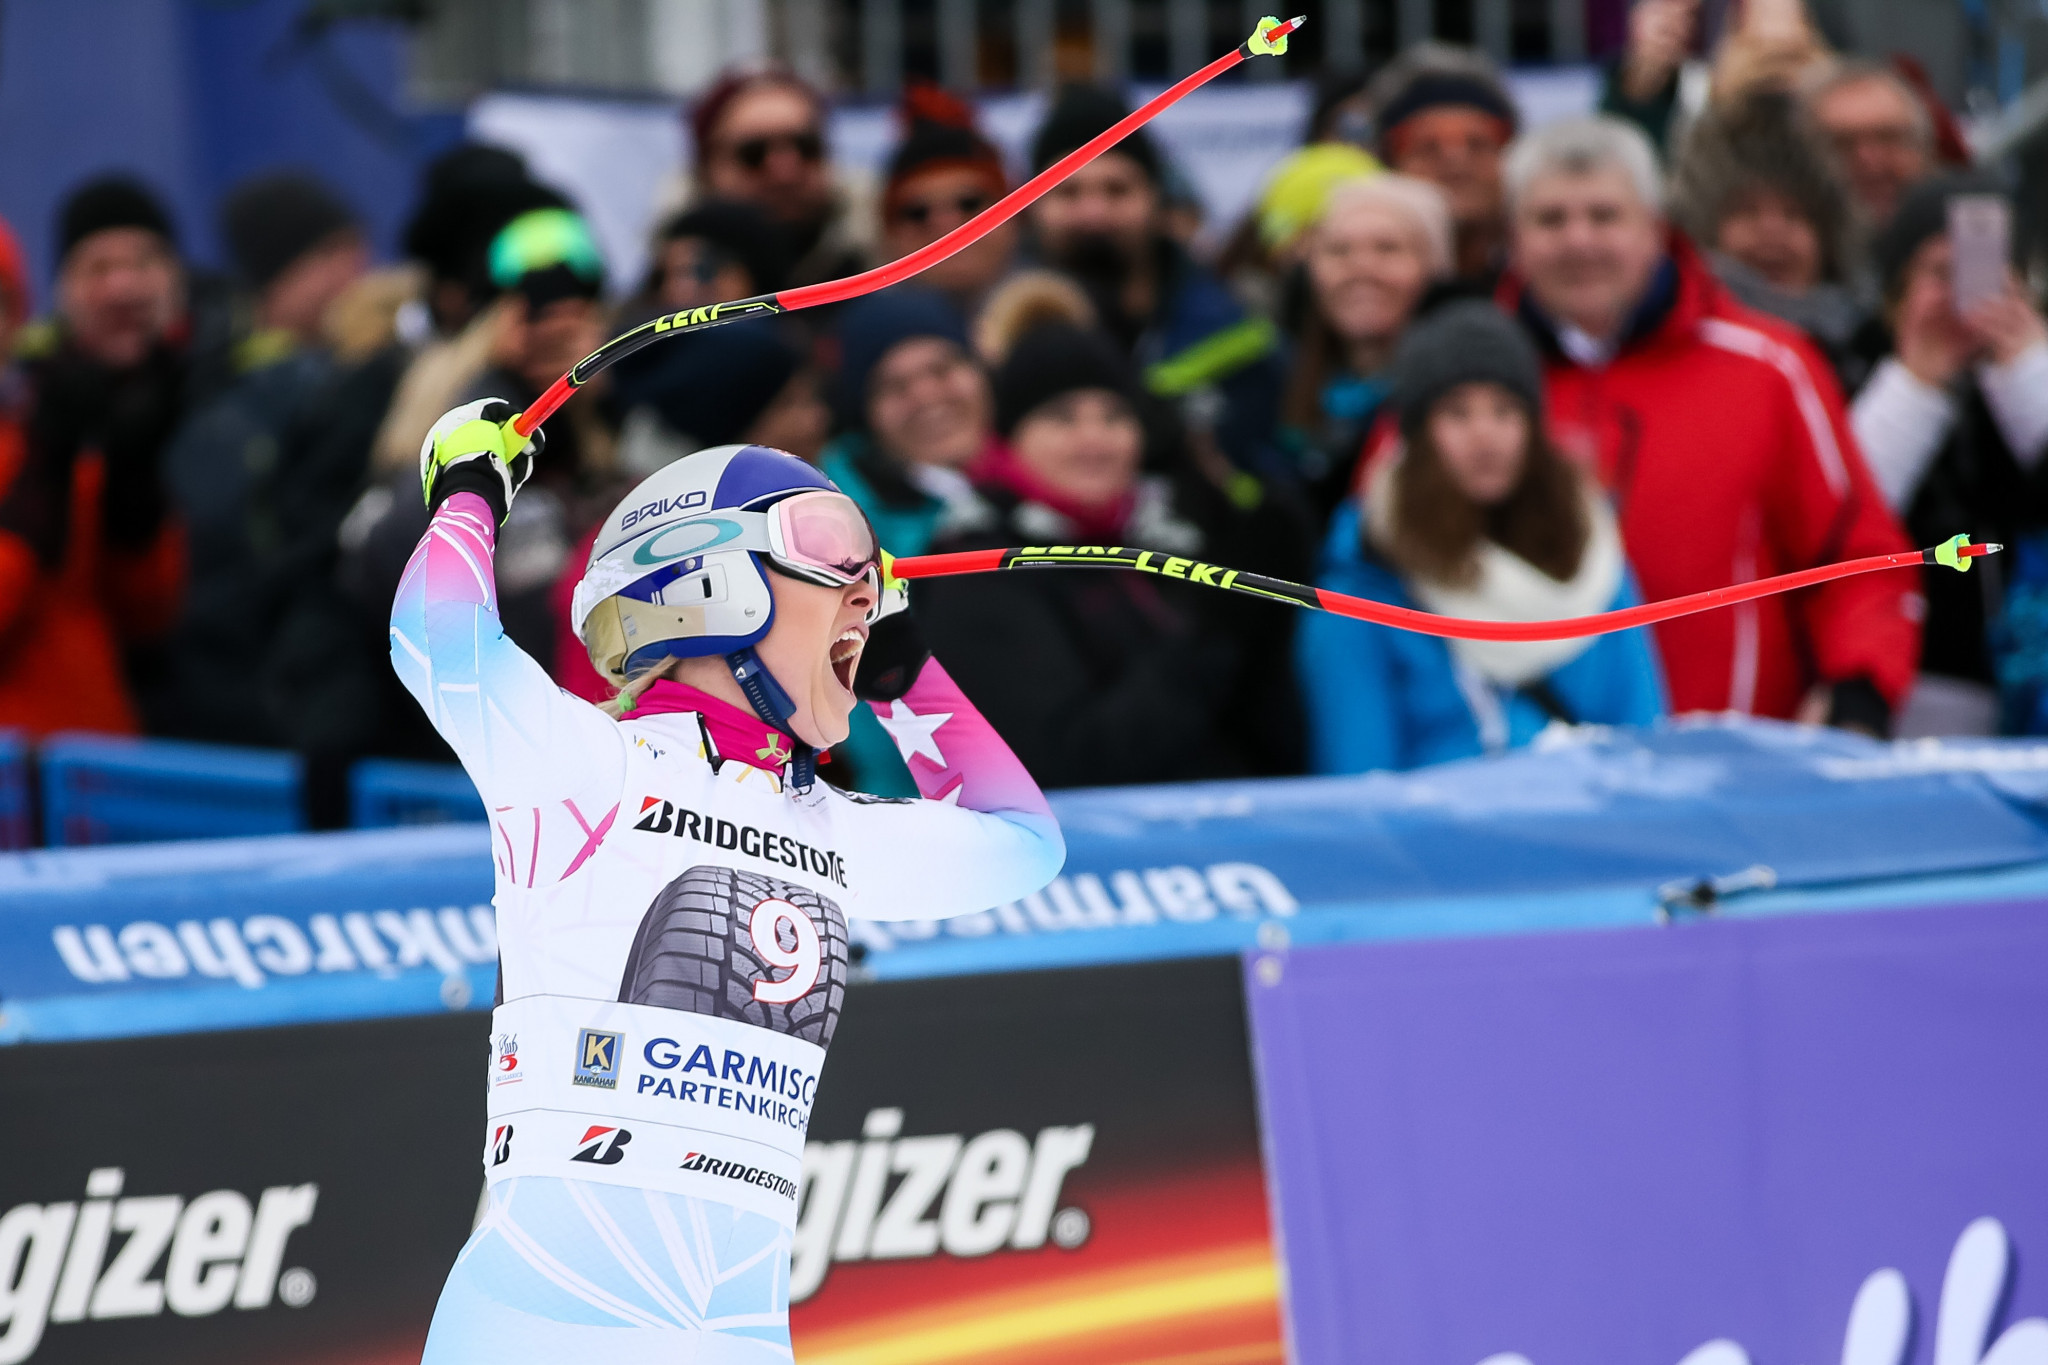 Vonn claims 80th win on FIS Alpine Skiing World Cup tour